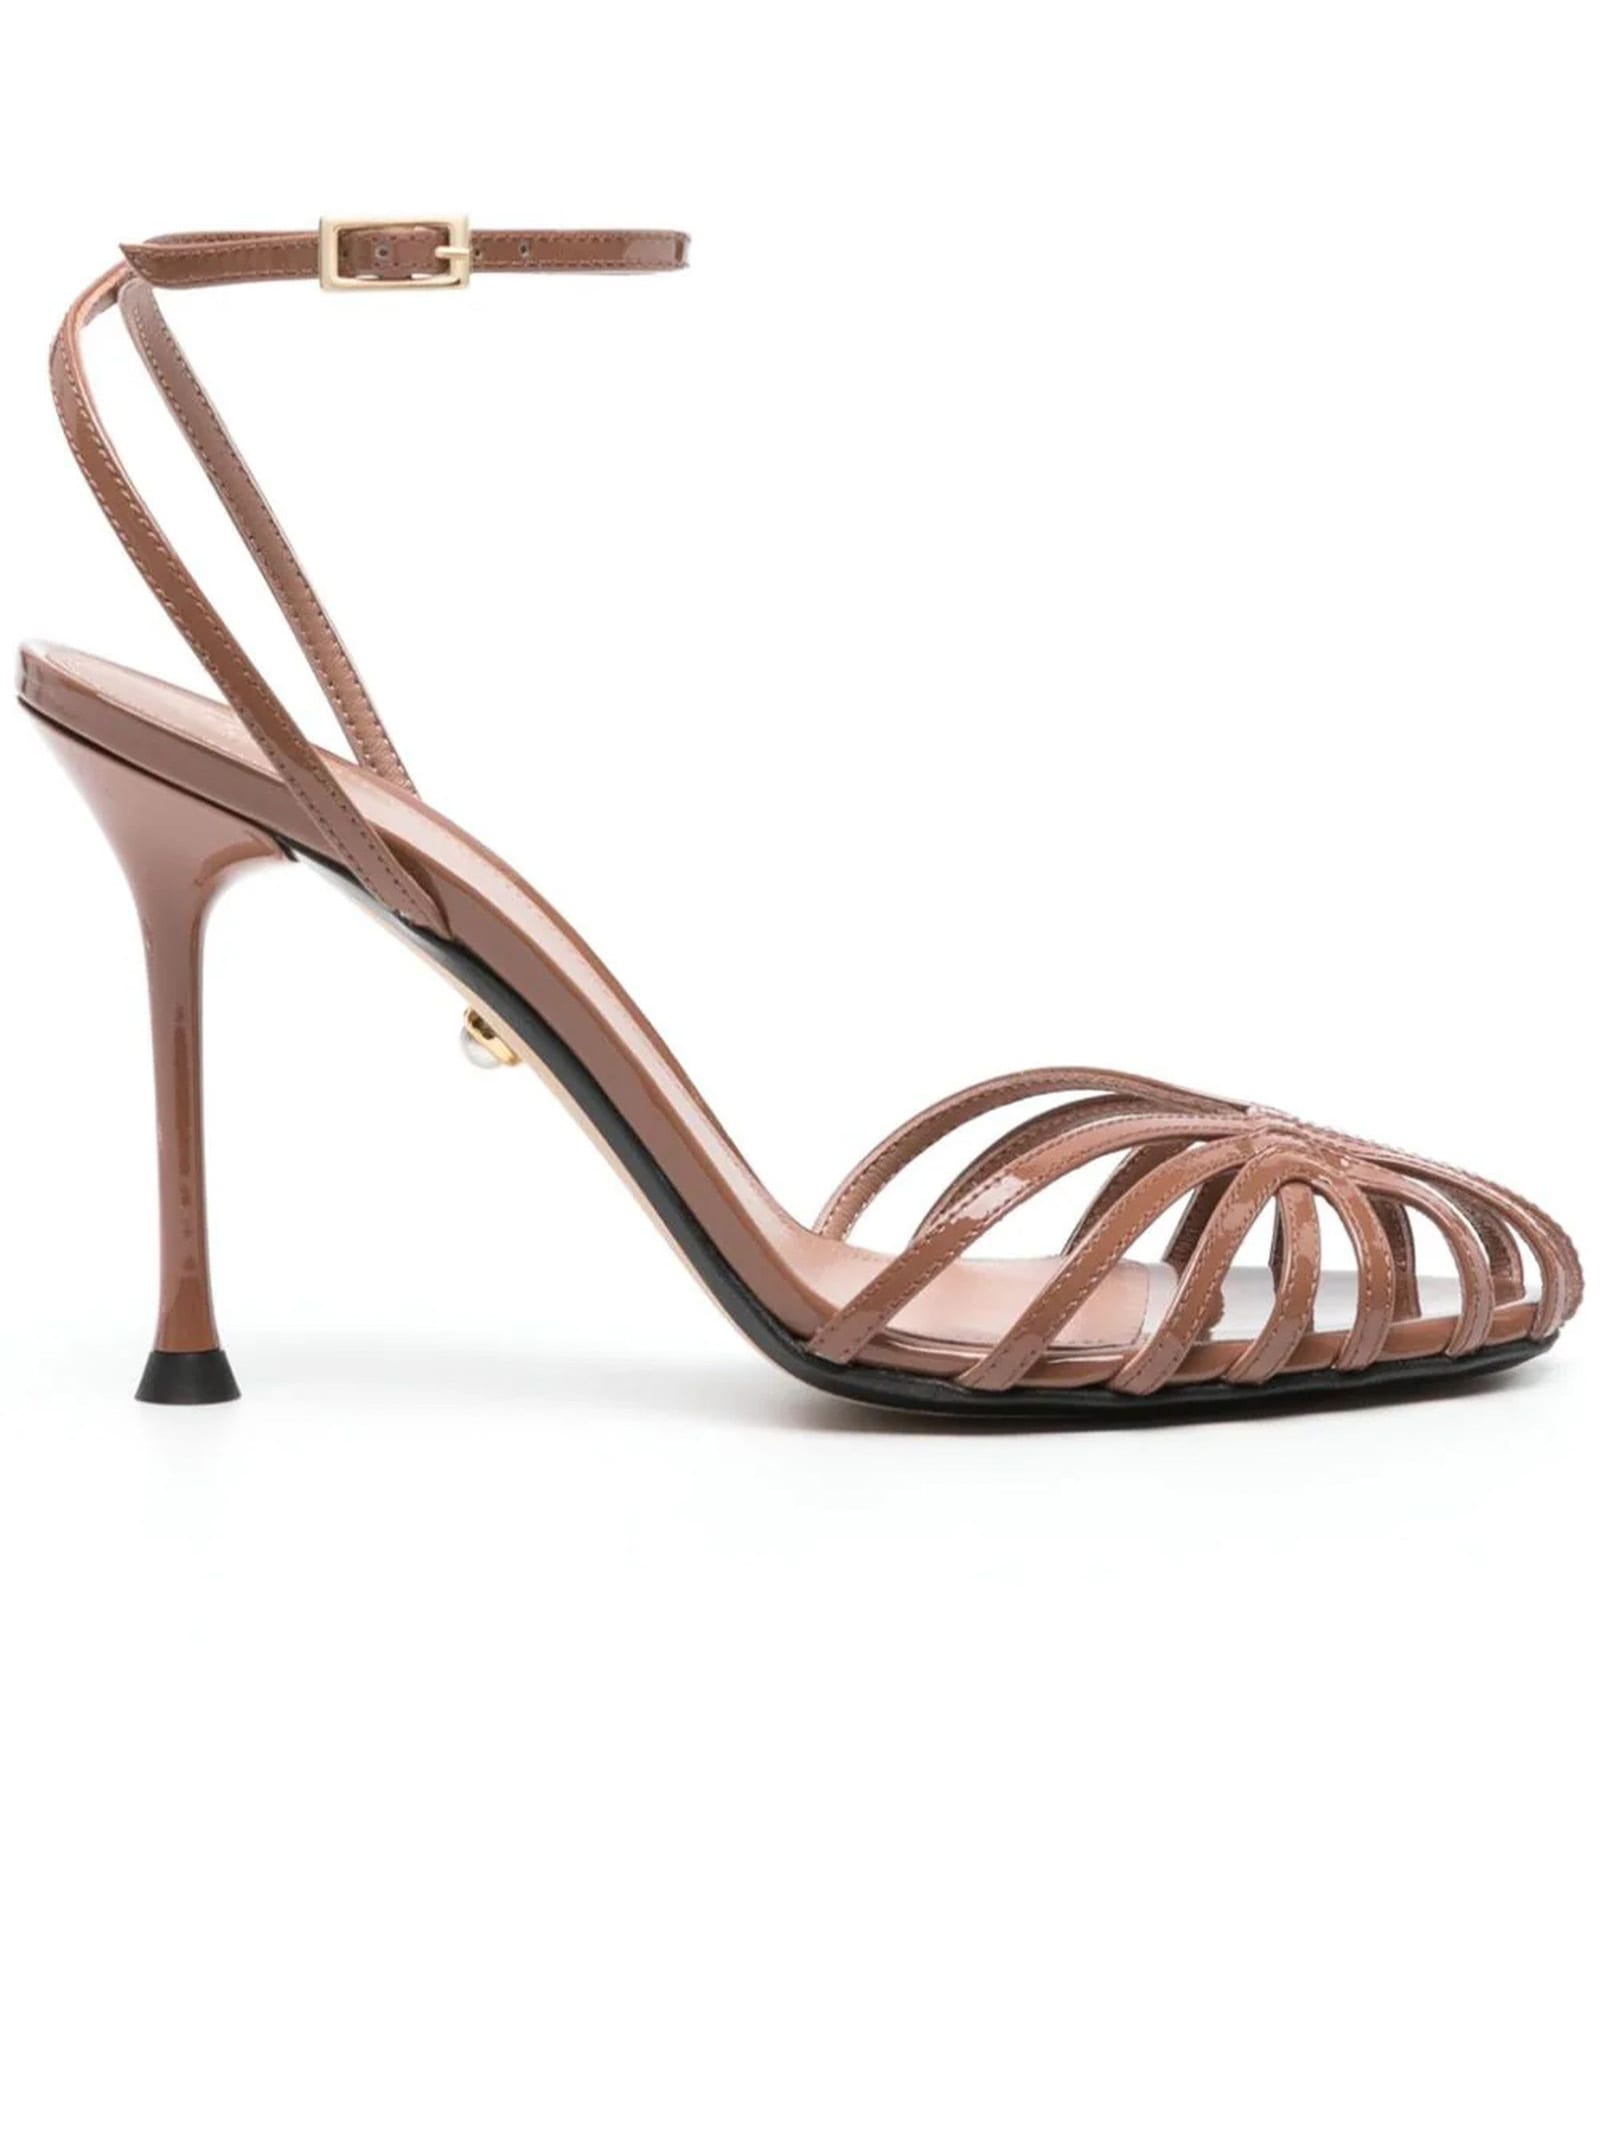 ALEVÌ CHOCOLATE BROWN CALF LEATHER SANDALS